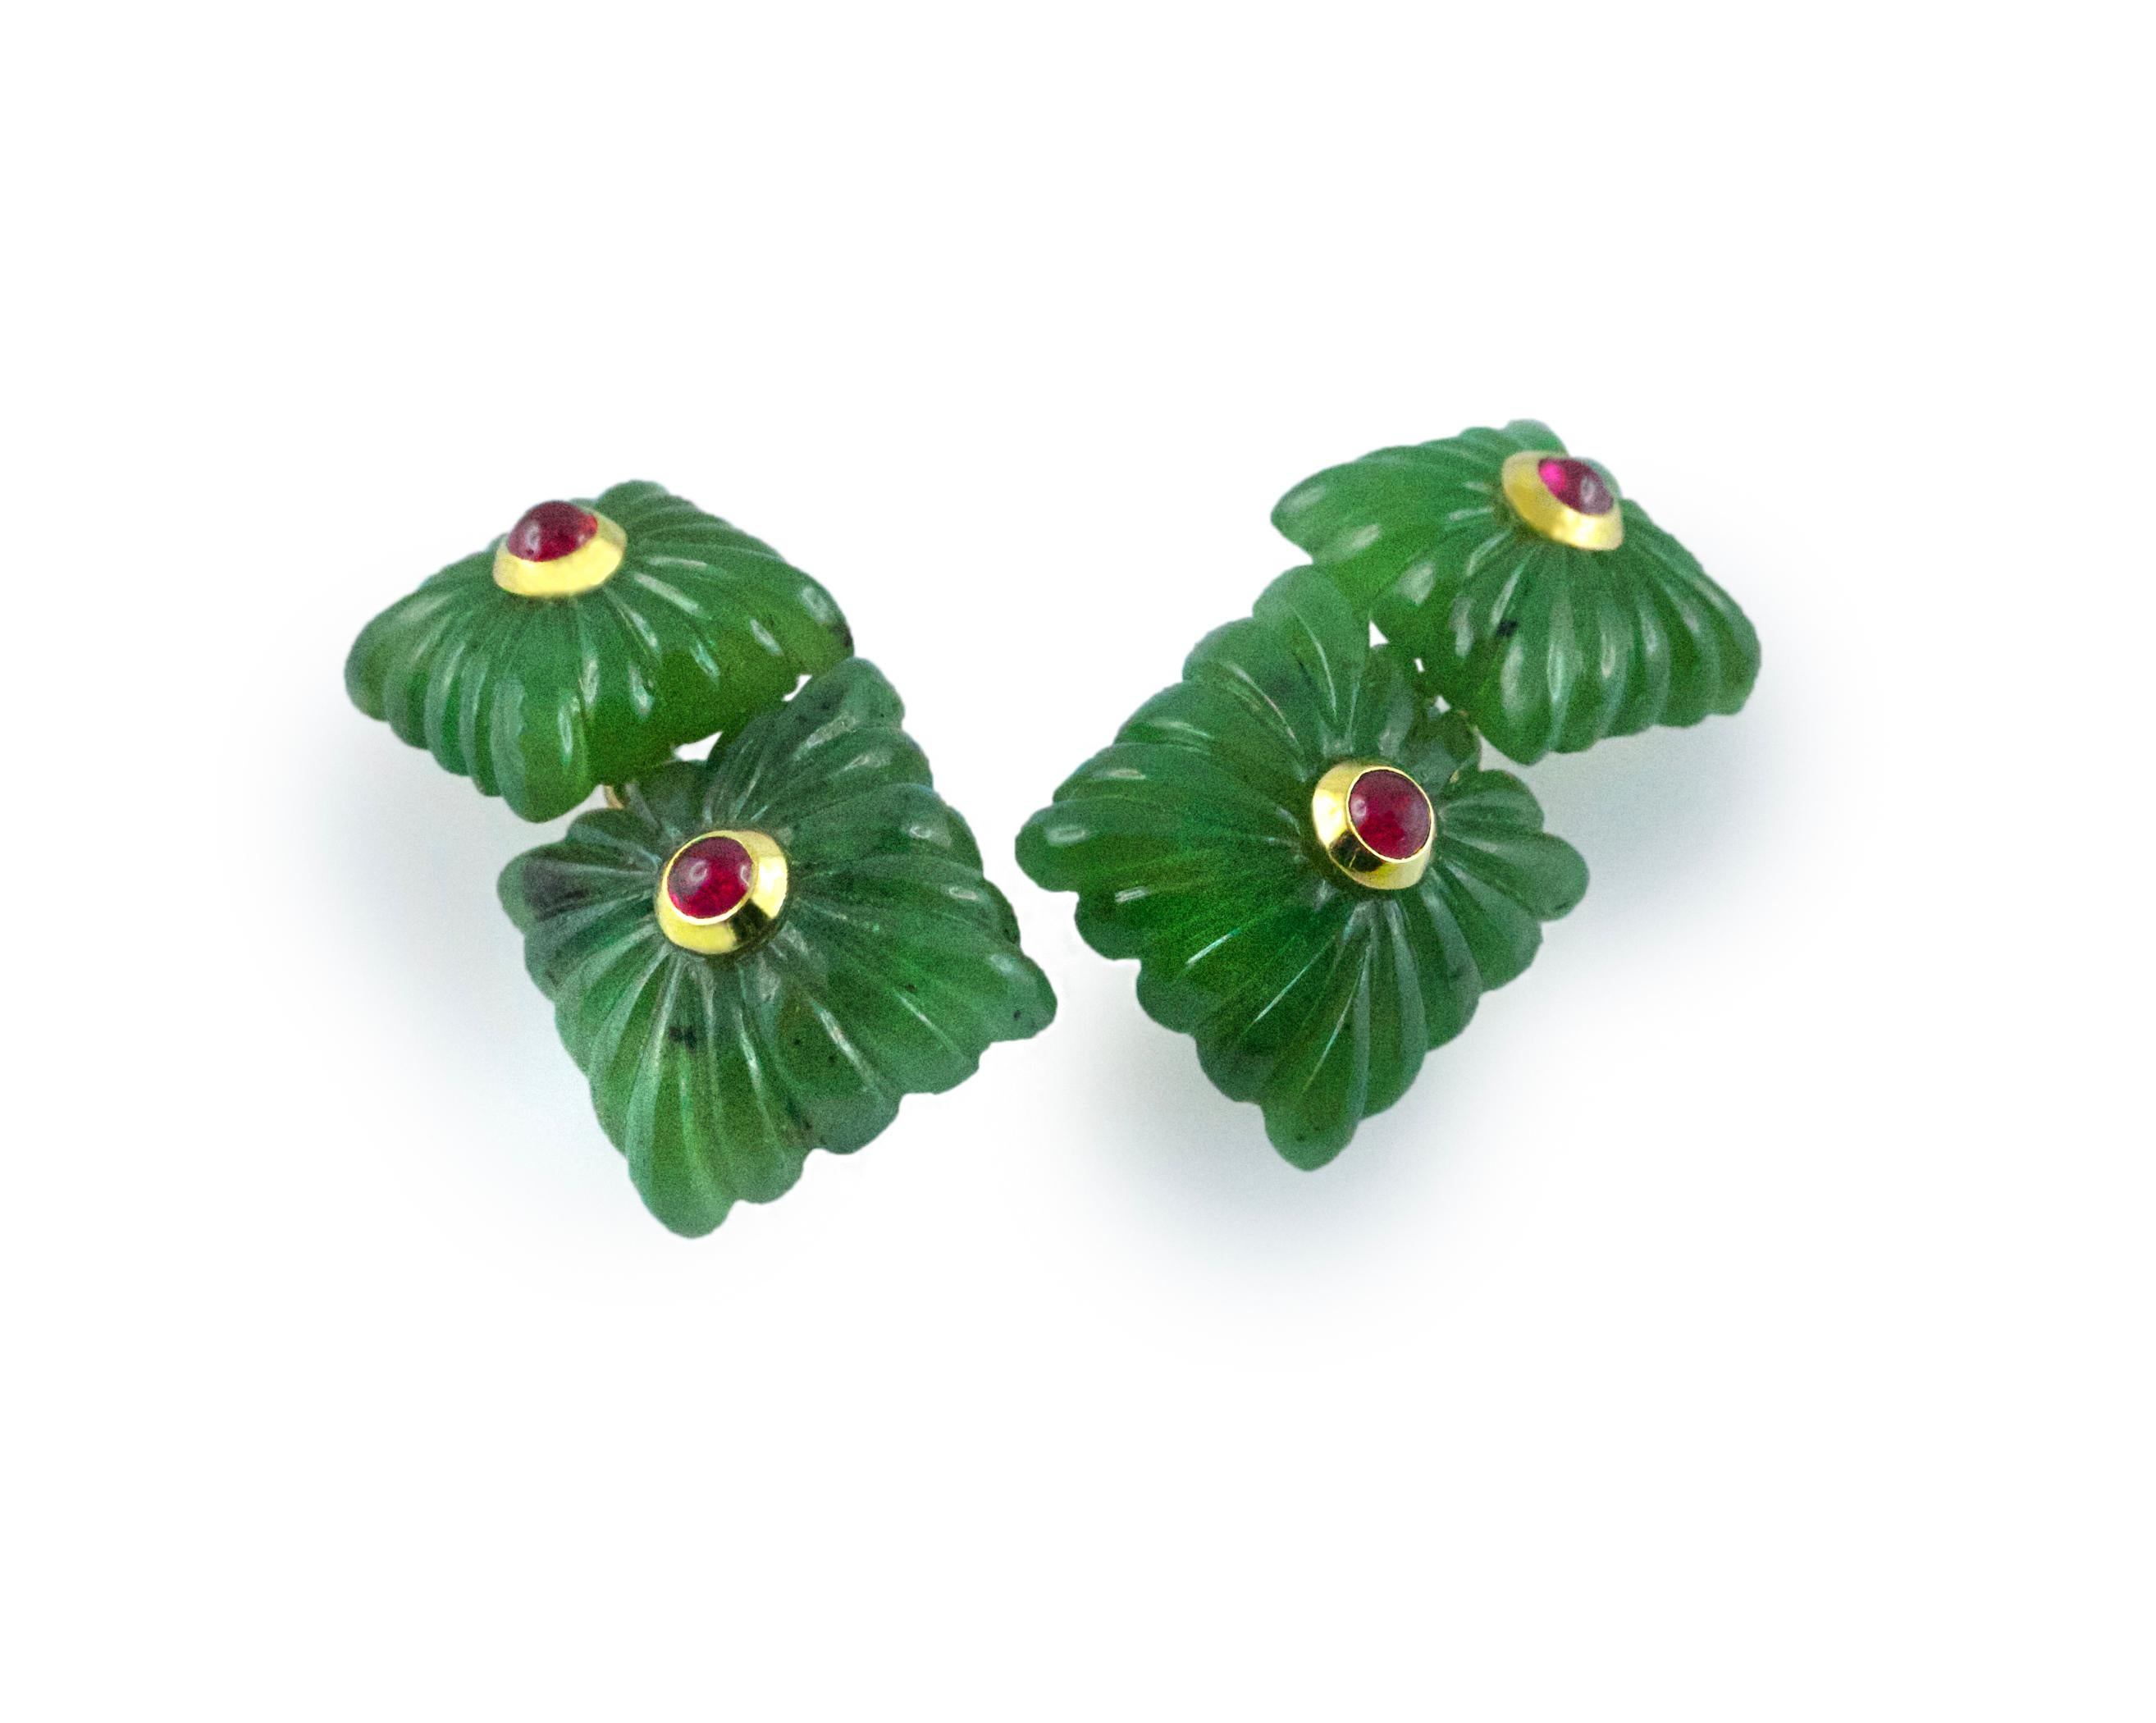 These exquisite cufflinks are made entirely of jade and feature a squared front face and a smaller, identically shaped toggle, both made of jade with the traditional “fesonato” texture. The center of each square is highlighted with a cabochon ruby